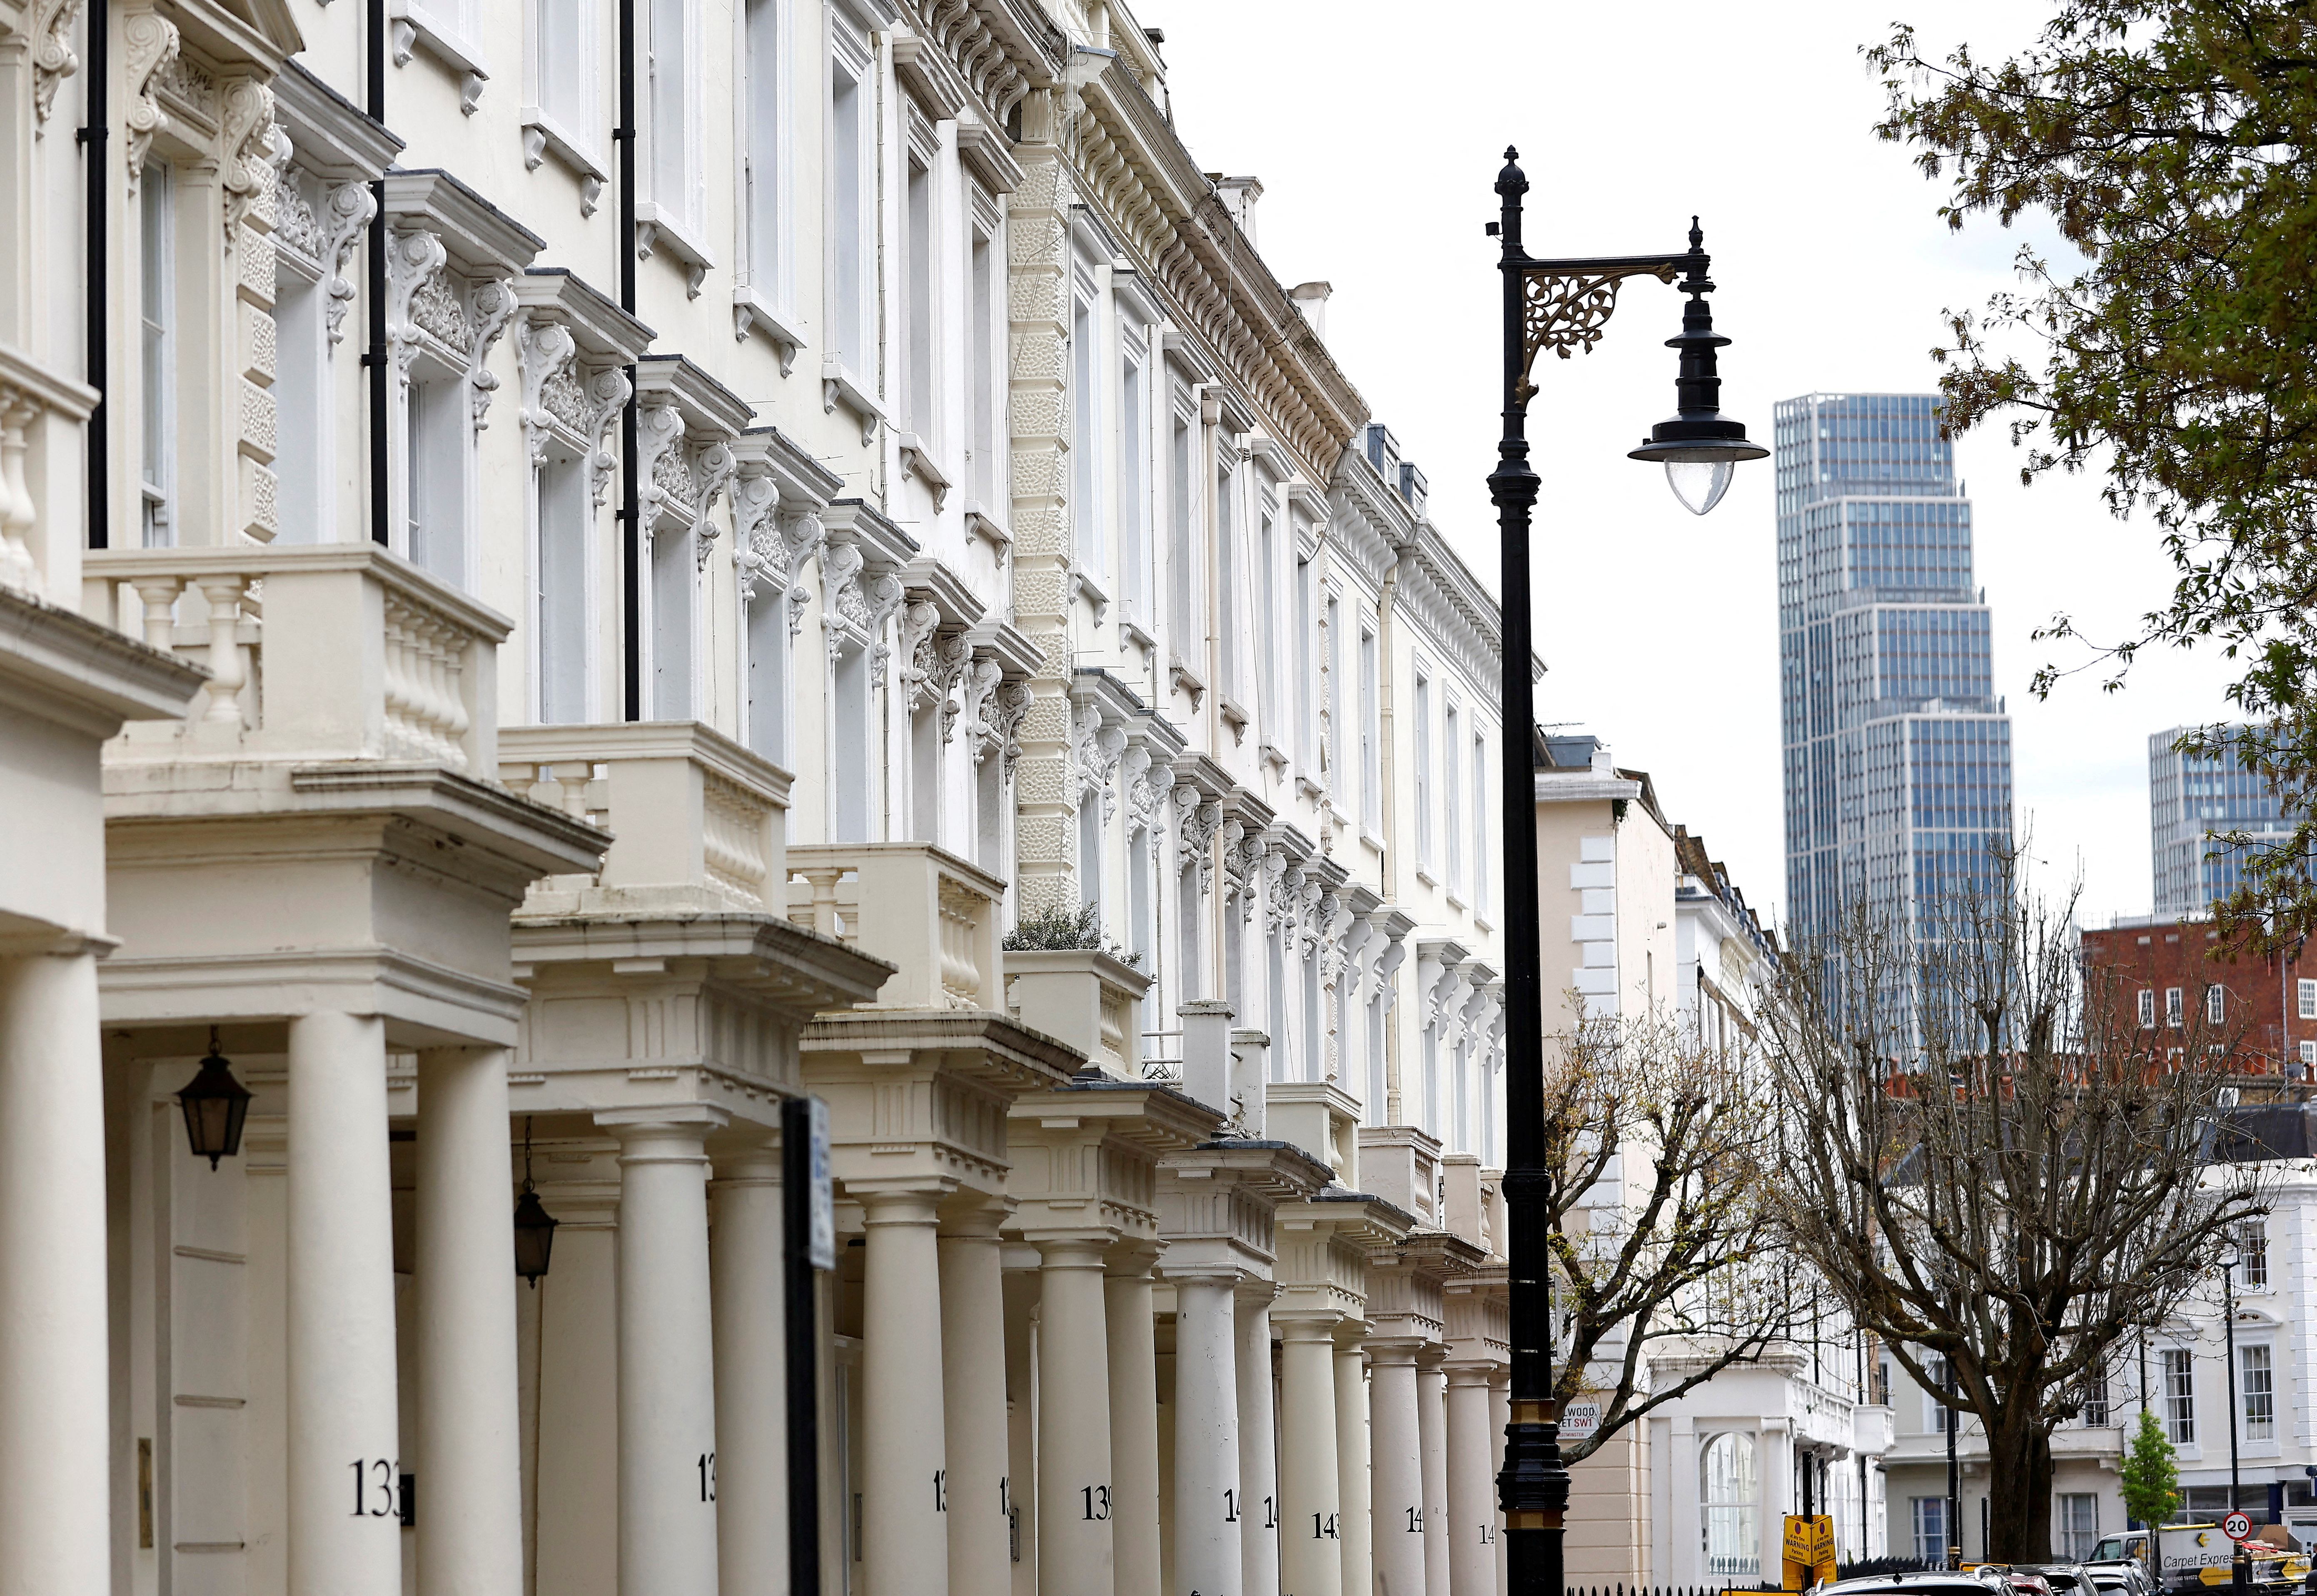 New apartment blocks are seen behind traditional housing in London